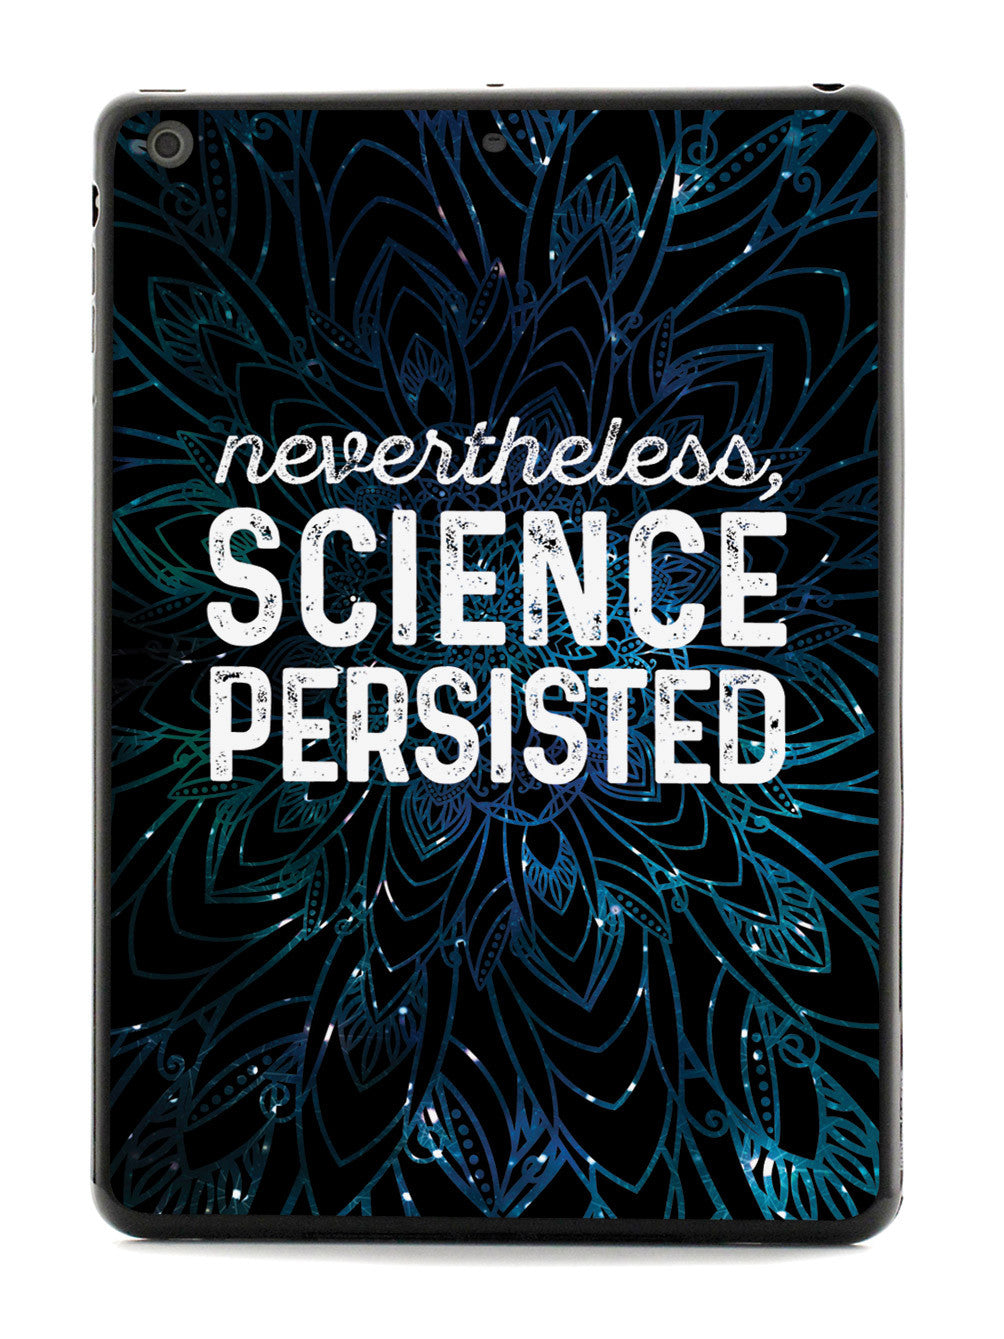 Nevertheless, Science Persisted - Black Case